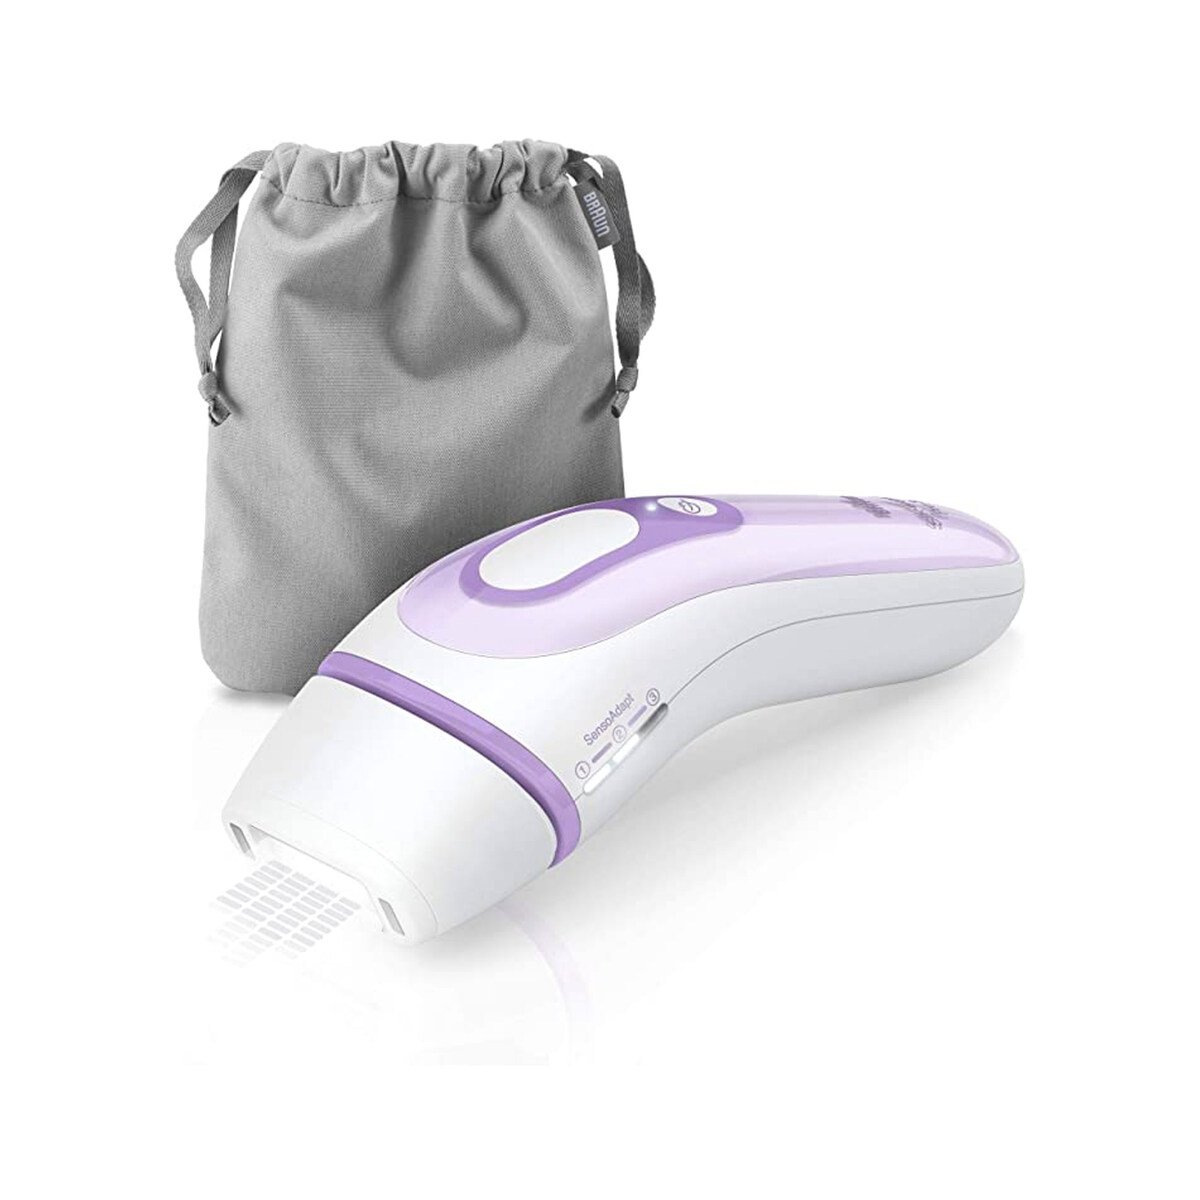 Braun Silk-Expert Mini IPL Laser Hair Removal Device with 2 Extras